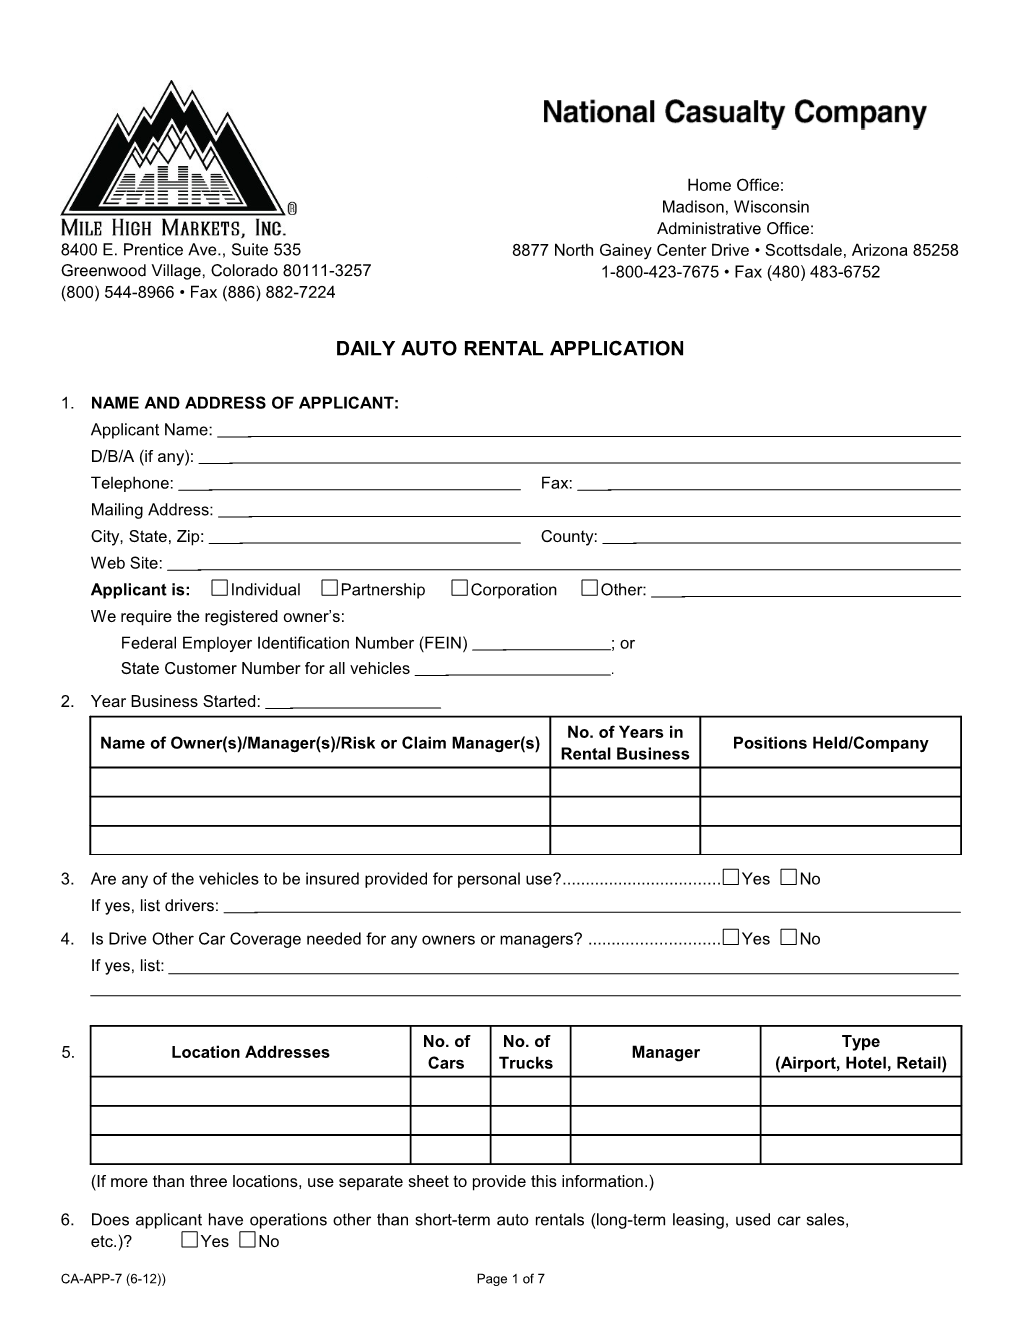 Daily Auto Rental Application